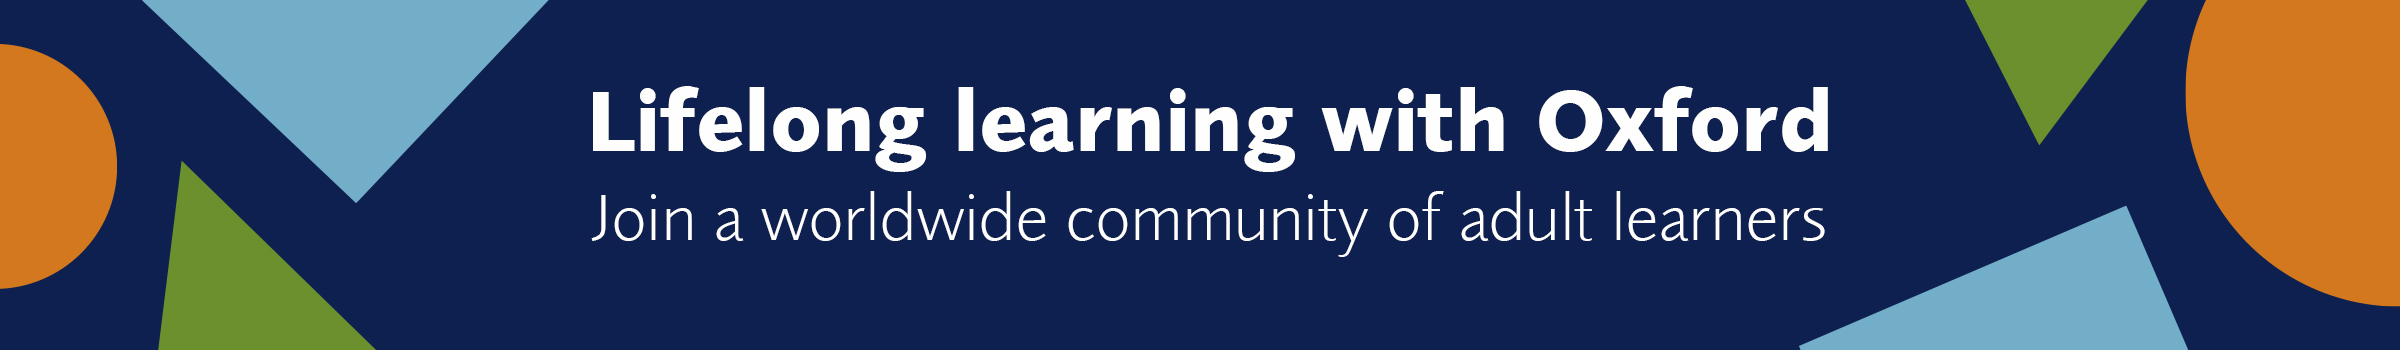 Lifelong learning with Oxford. Join a worldwide community of adult learners.